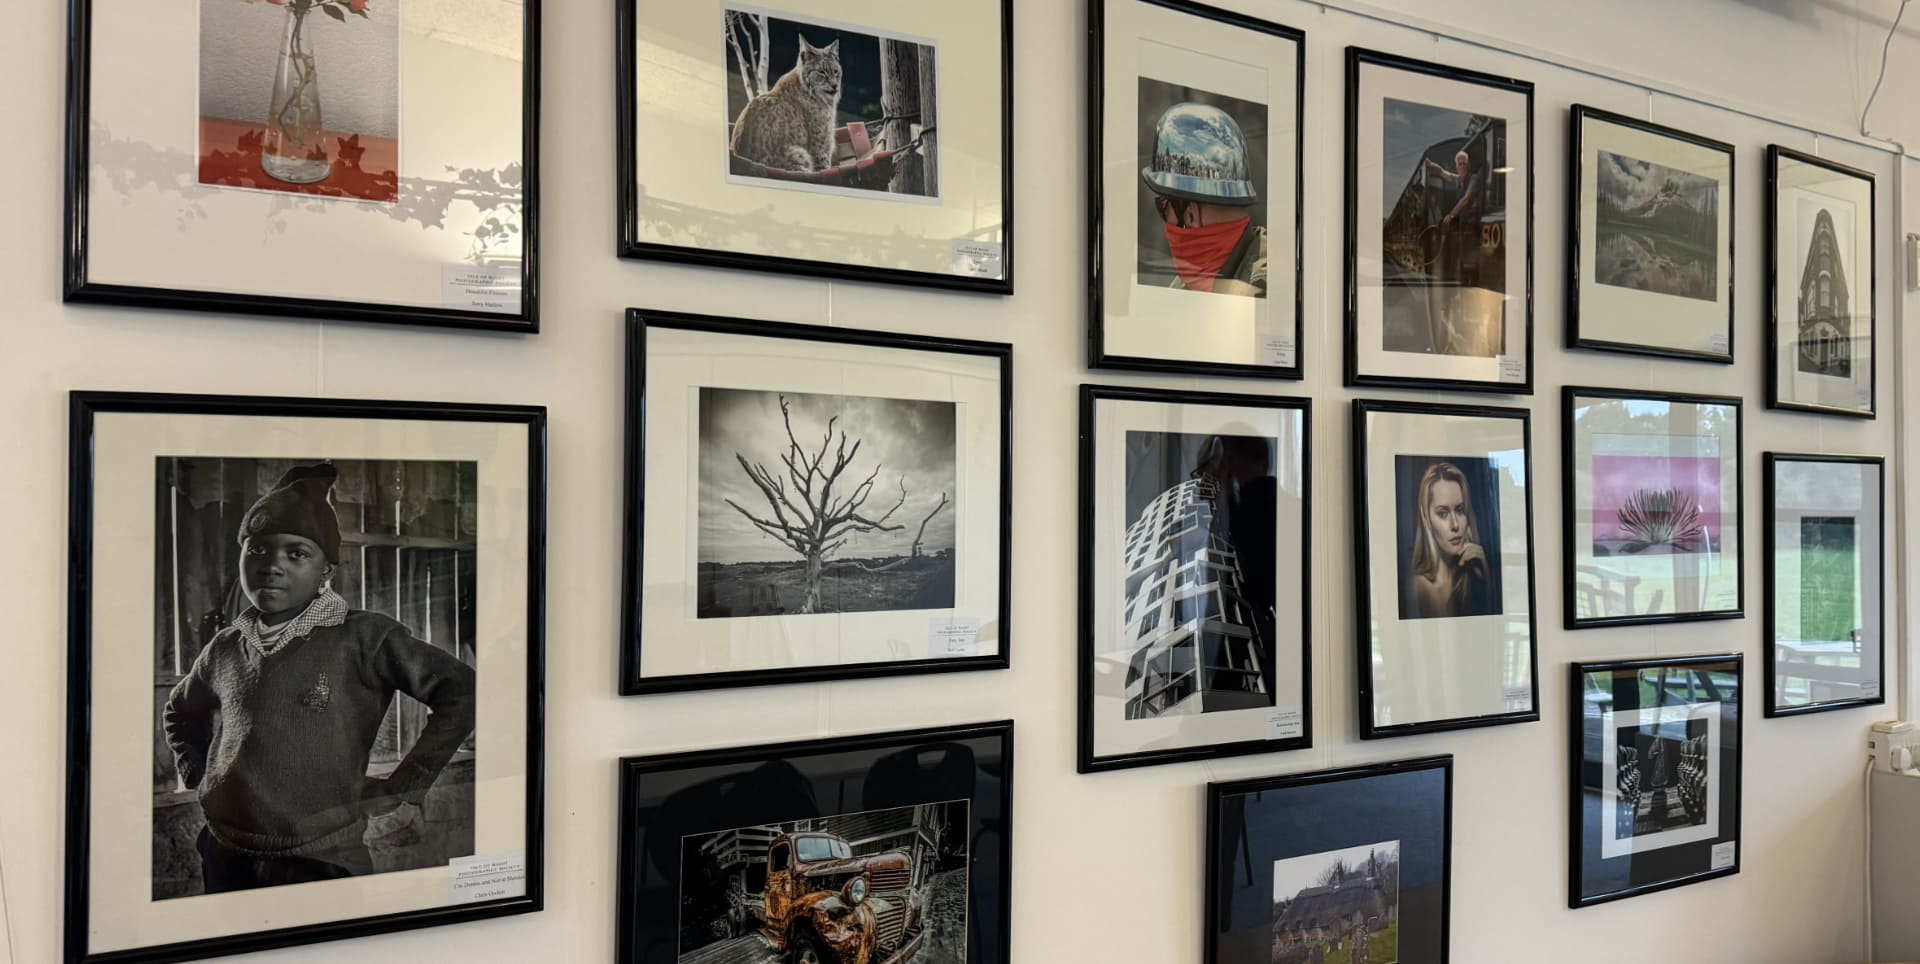 IW Photographic Society exhibition - showing framed photos on wall